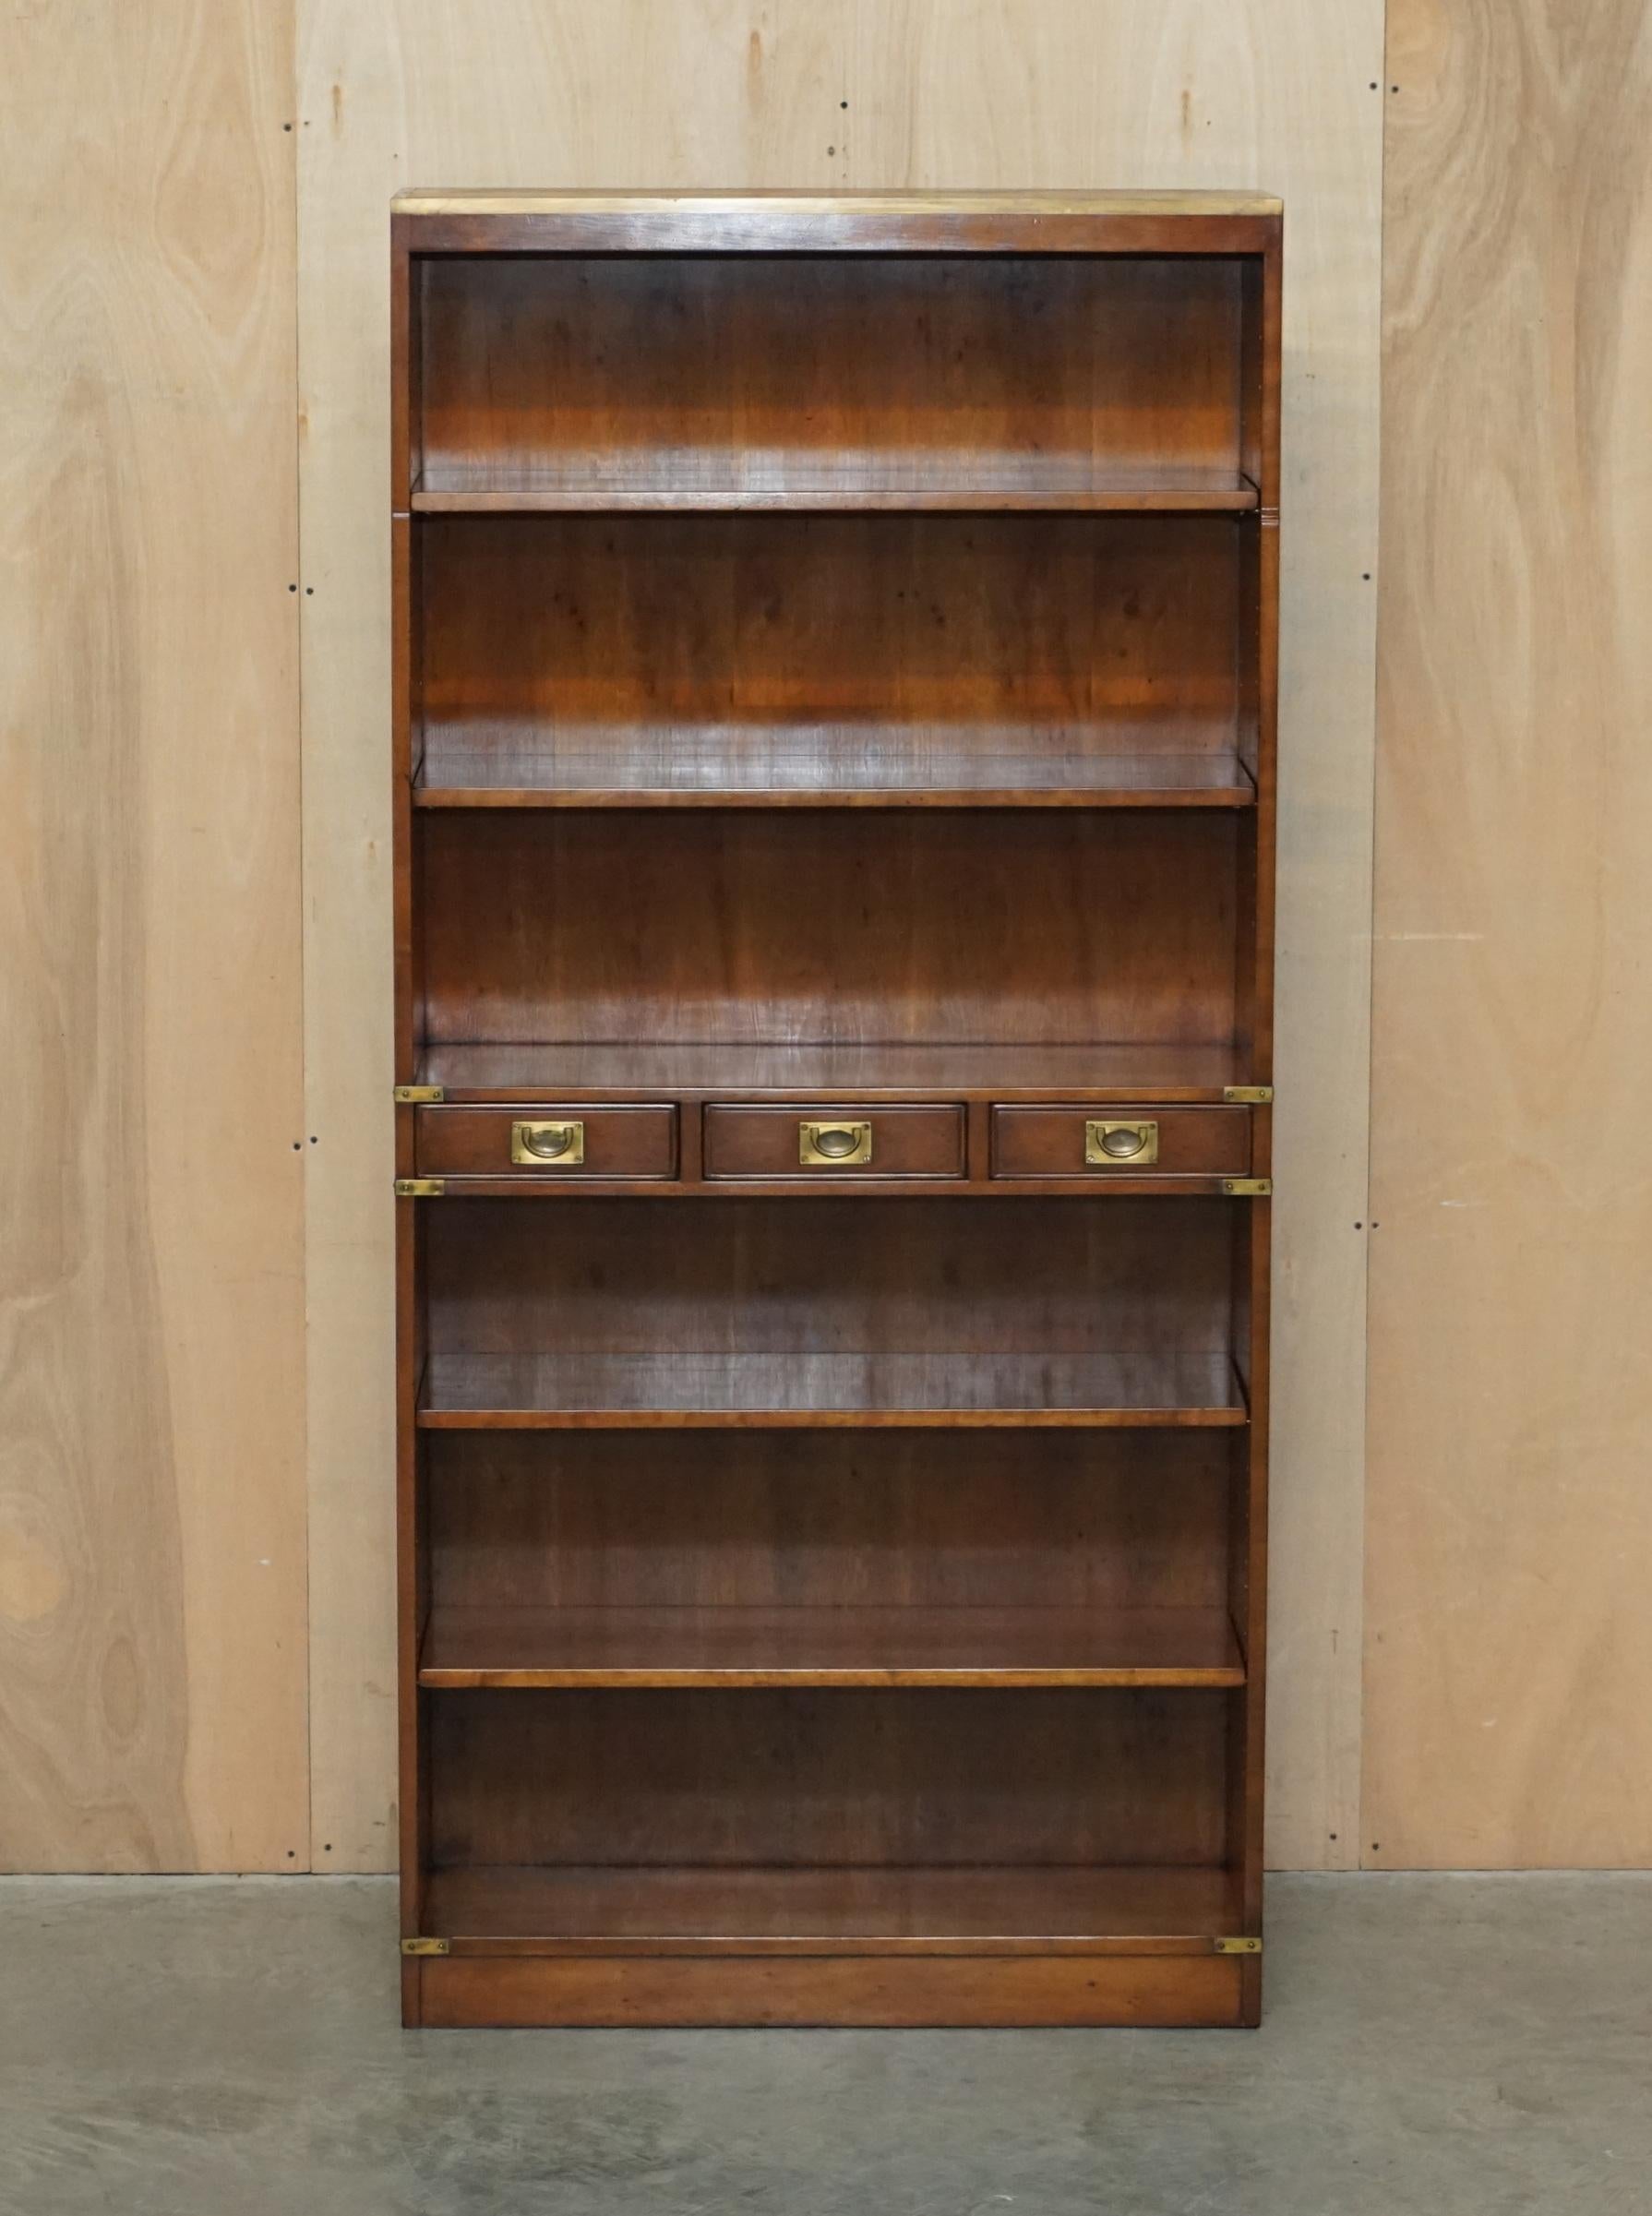 Royal House Antiques

Royal House Antiques is delighted to offer for this lovely vintage Harrods Kennedy Burr Yew wood & Brass Military Campaign three drawer open library bookcase 

Please note the delivery fee listed is just a guide, it covers